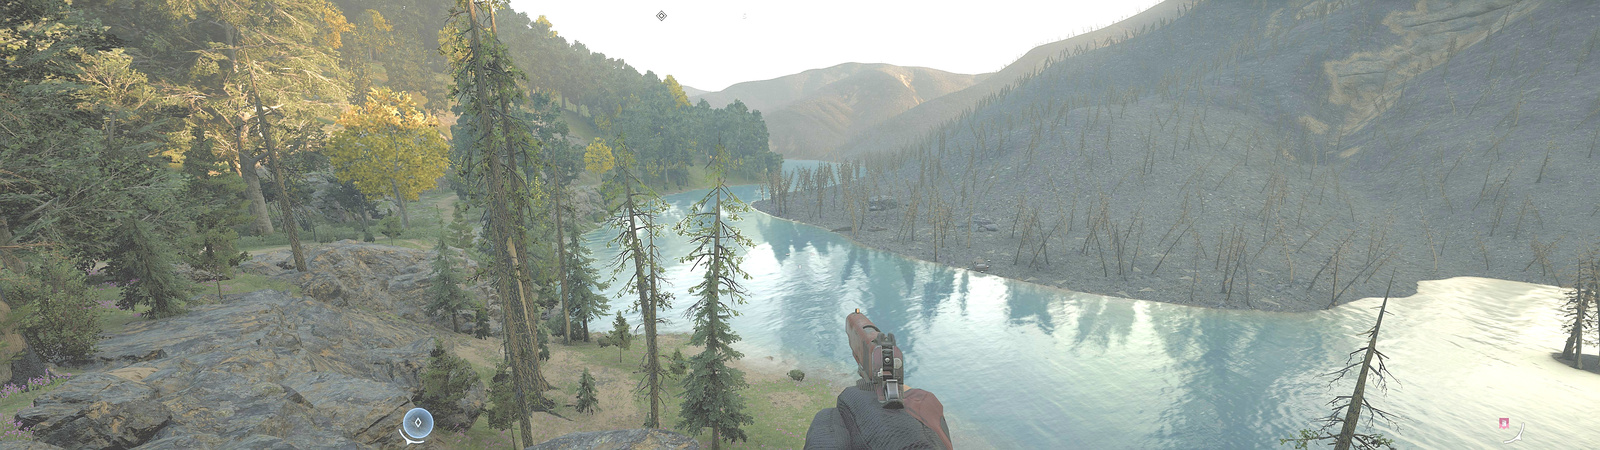 First person holding a handgun looking out over a river